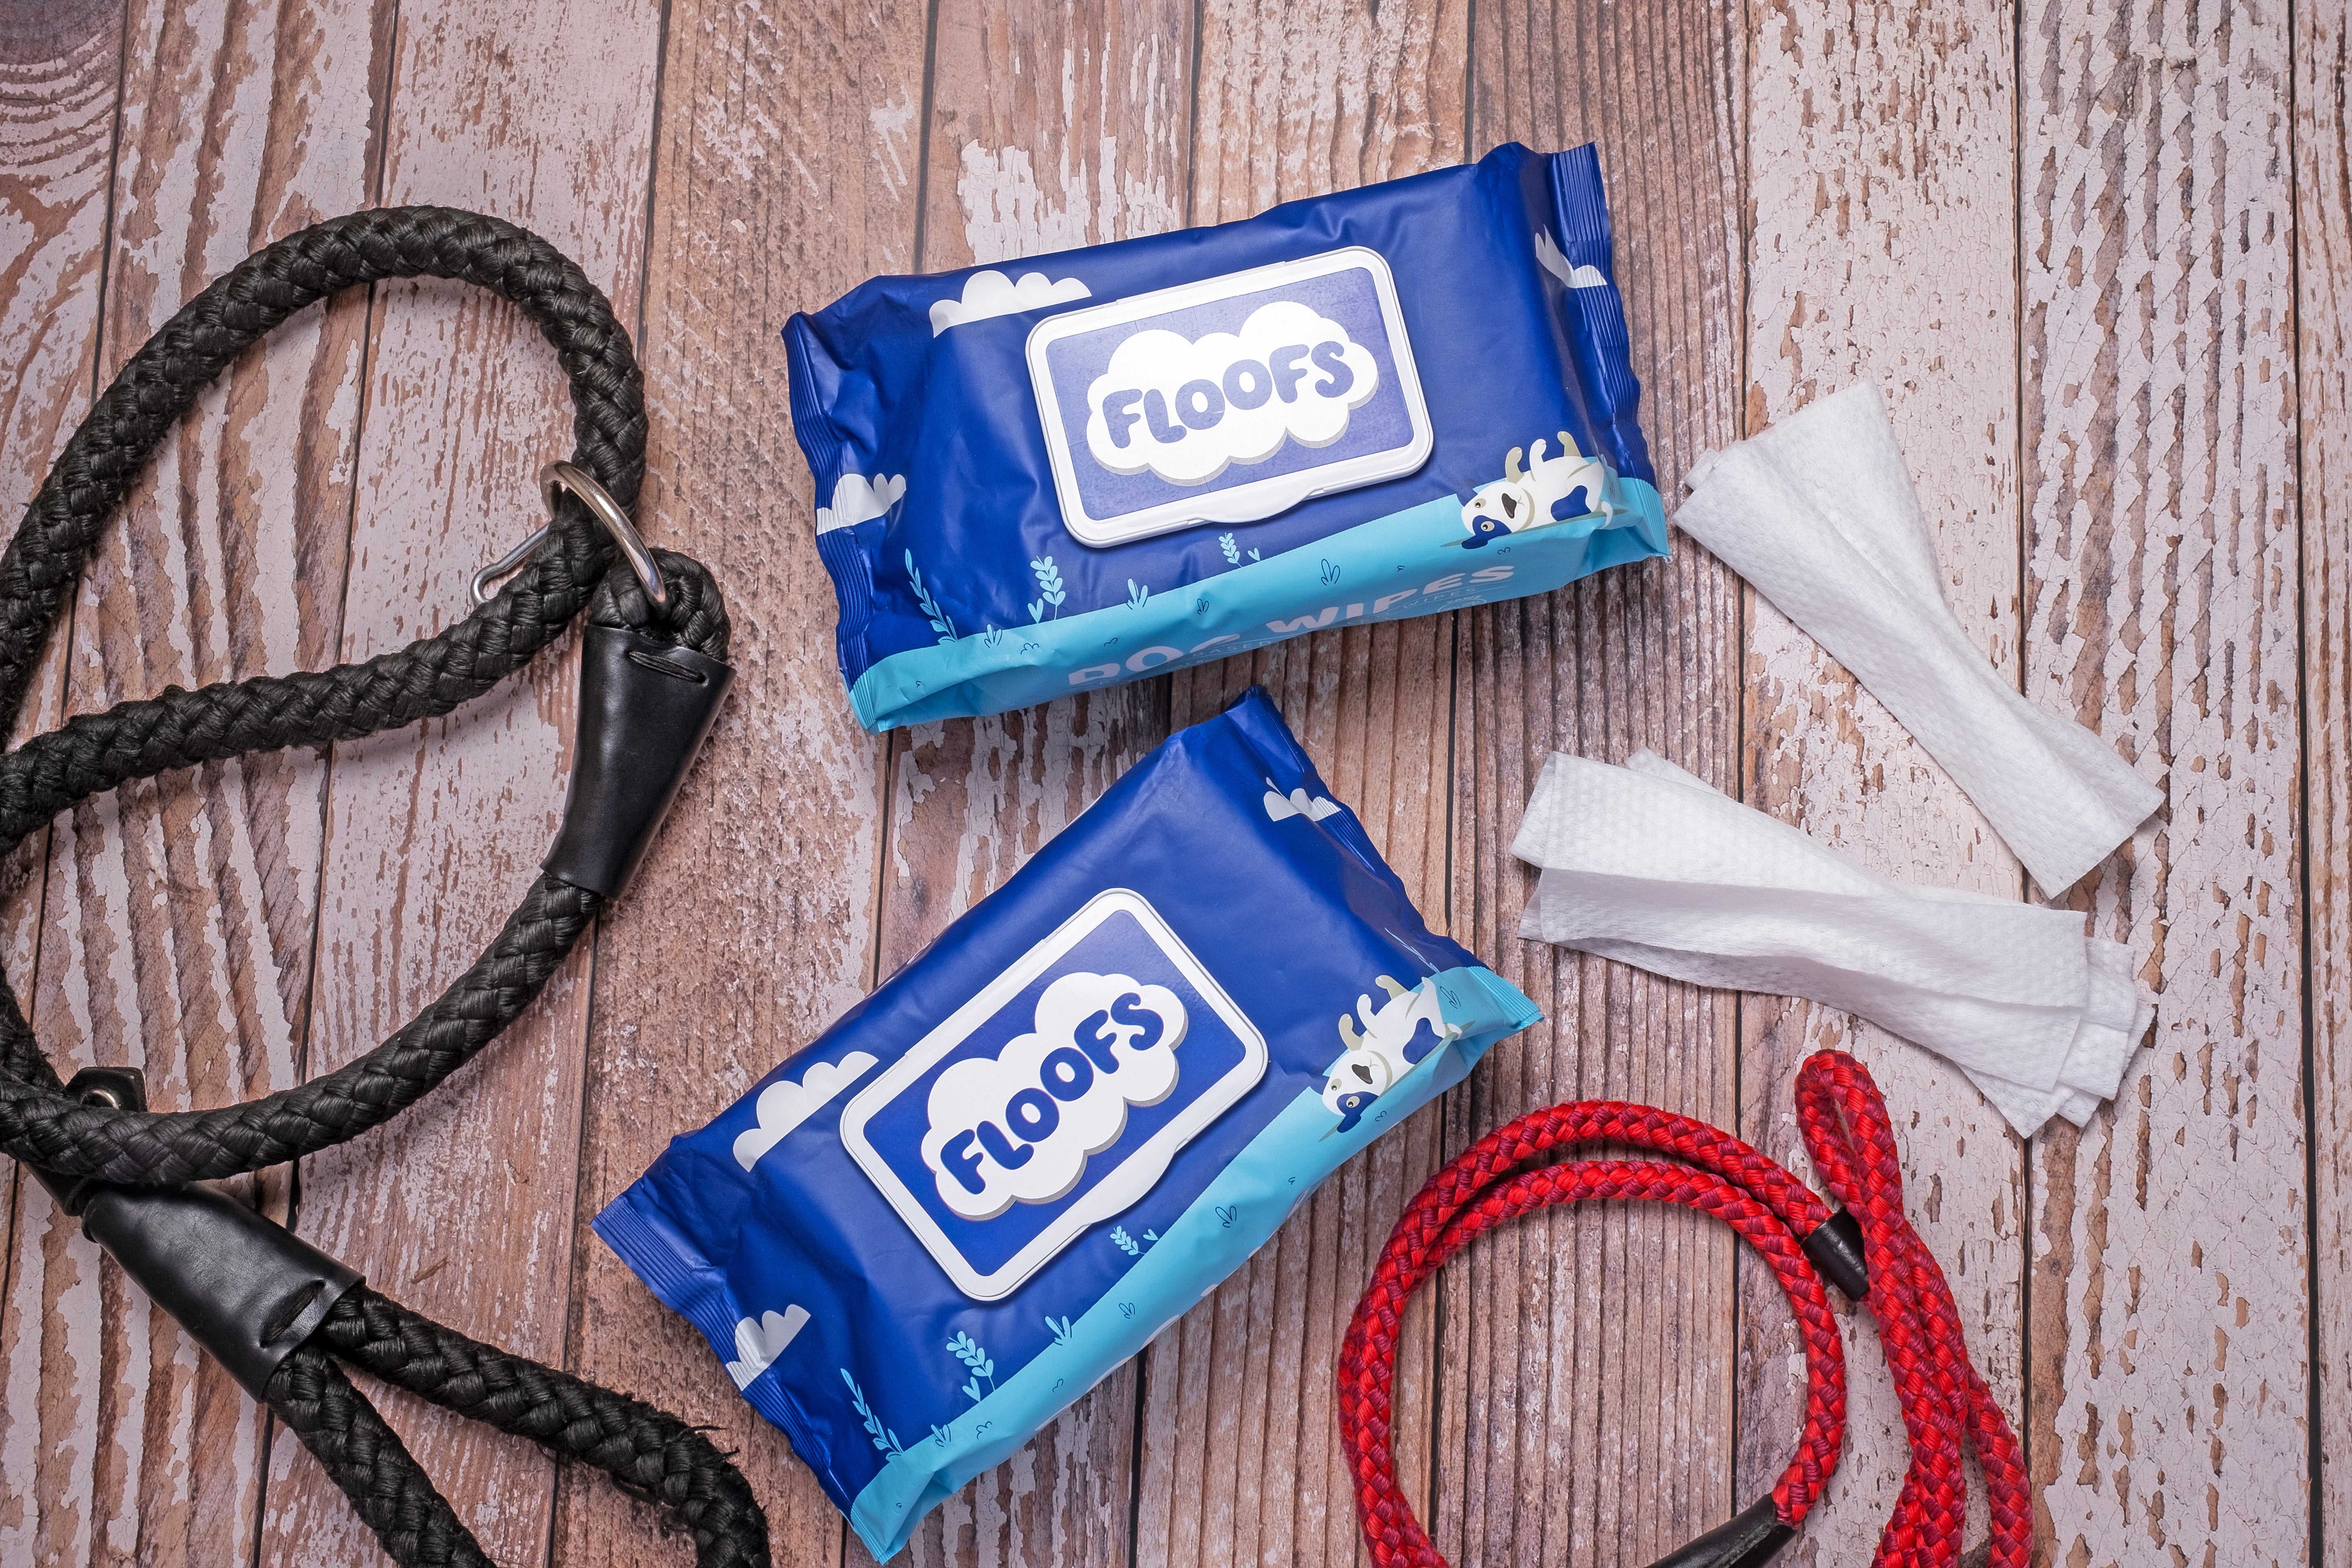 Floofs Pet wipes on a wooden surface surrounded by dog leads and loose wipes